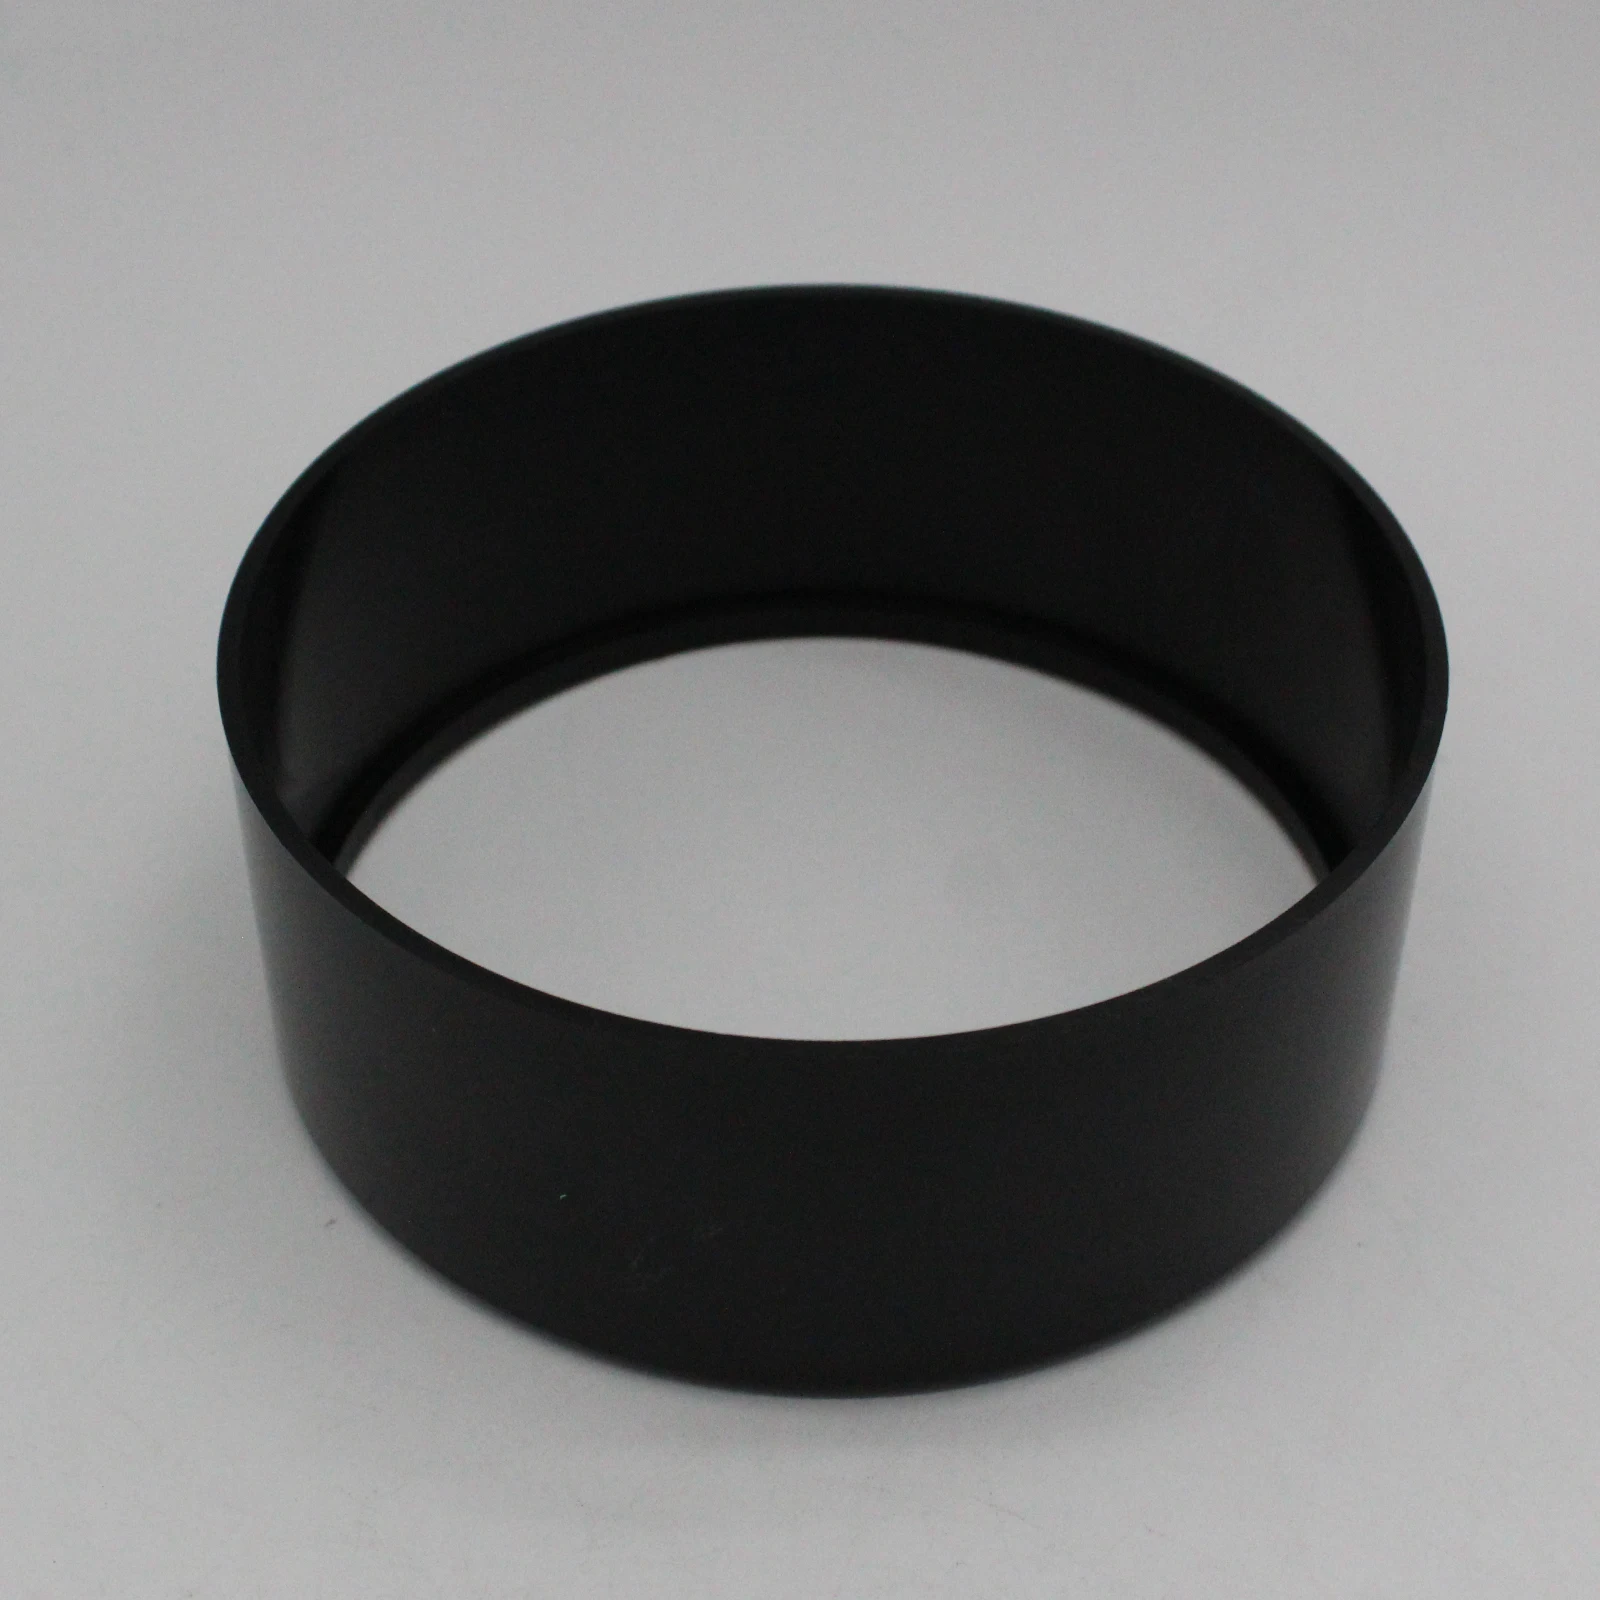 2Inch  Resistant ABS Plastic  Spacer Car Accseeory Replaments Part for   SBC  454   (Black)